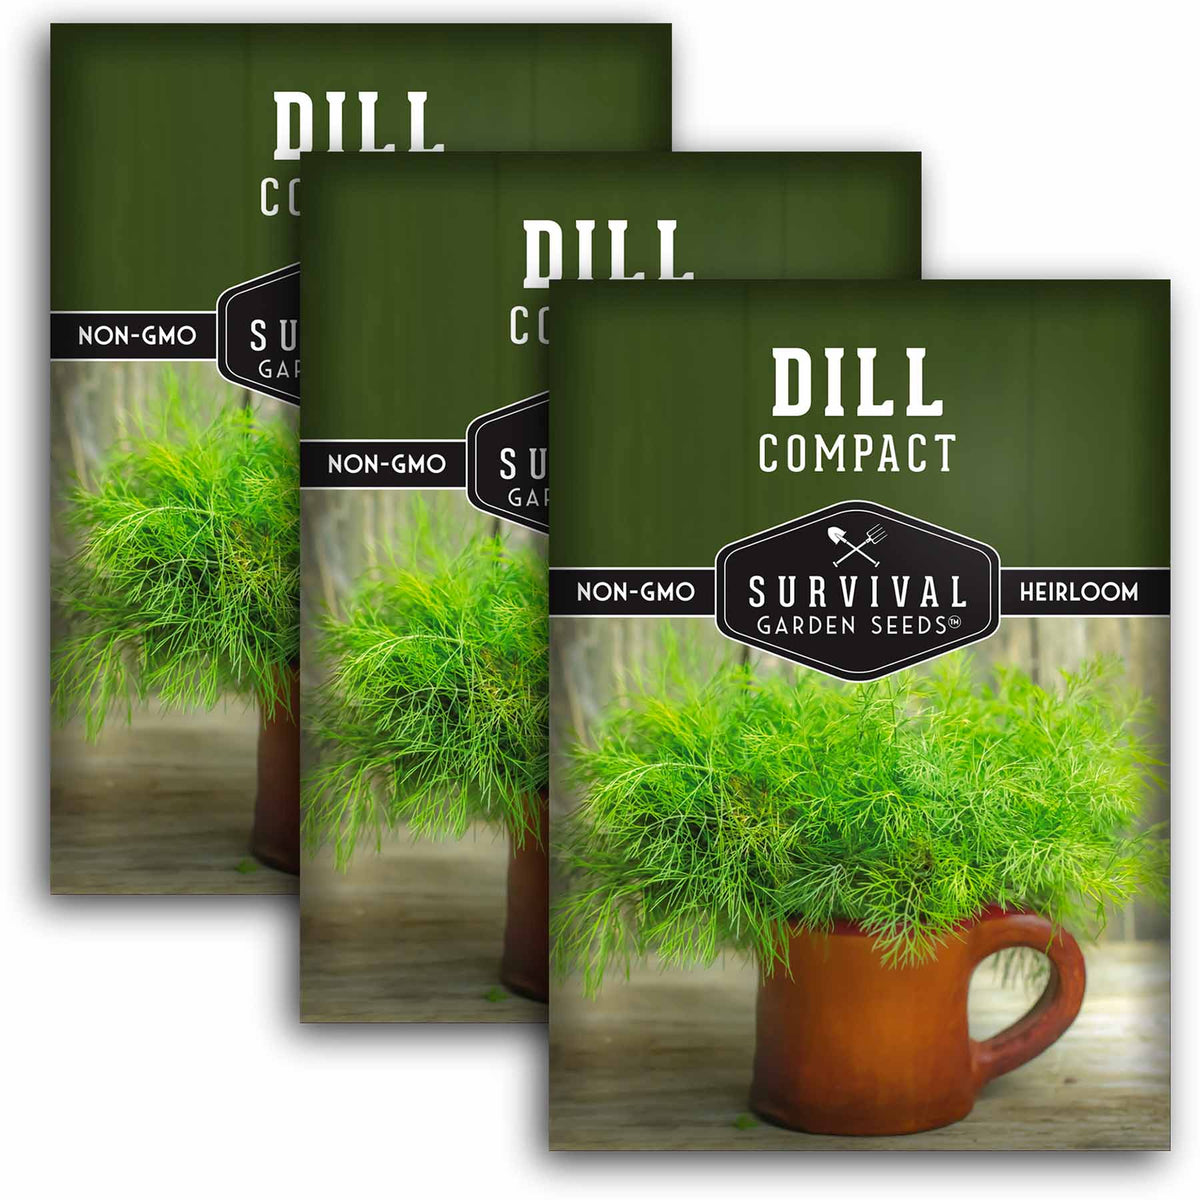 3 packets of Compact Dill seeds